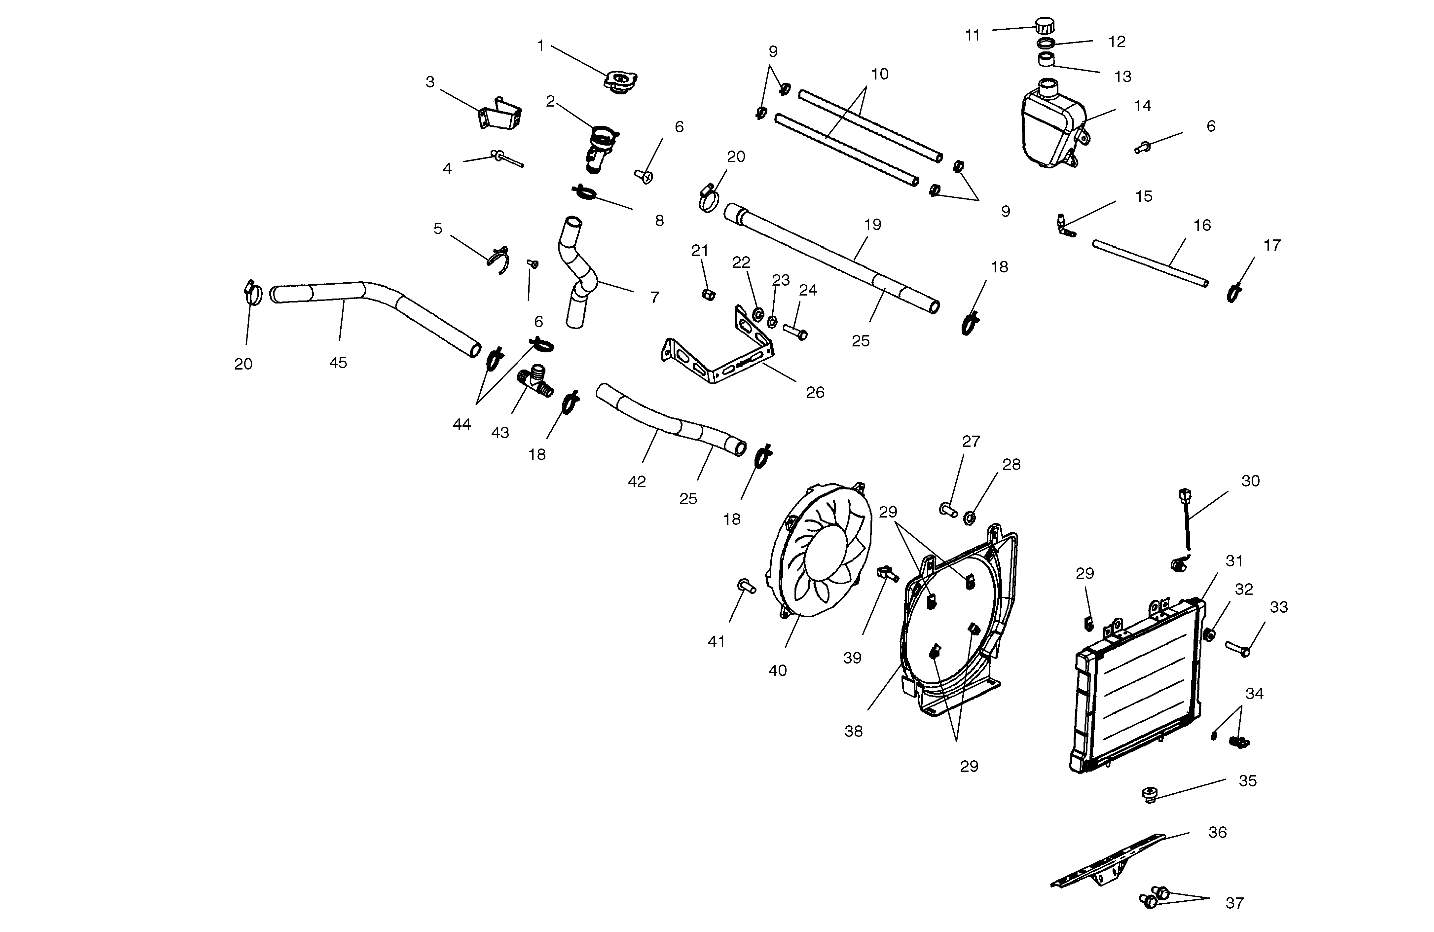 Part Number : 4010631 CLIP-WIRING